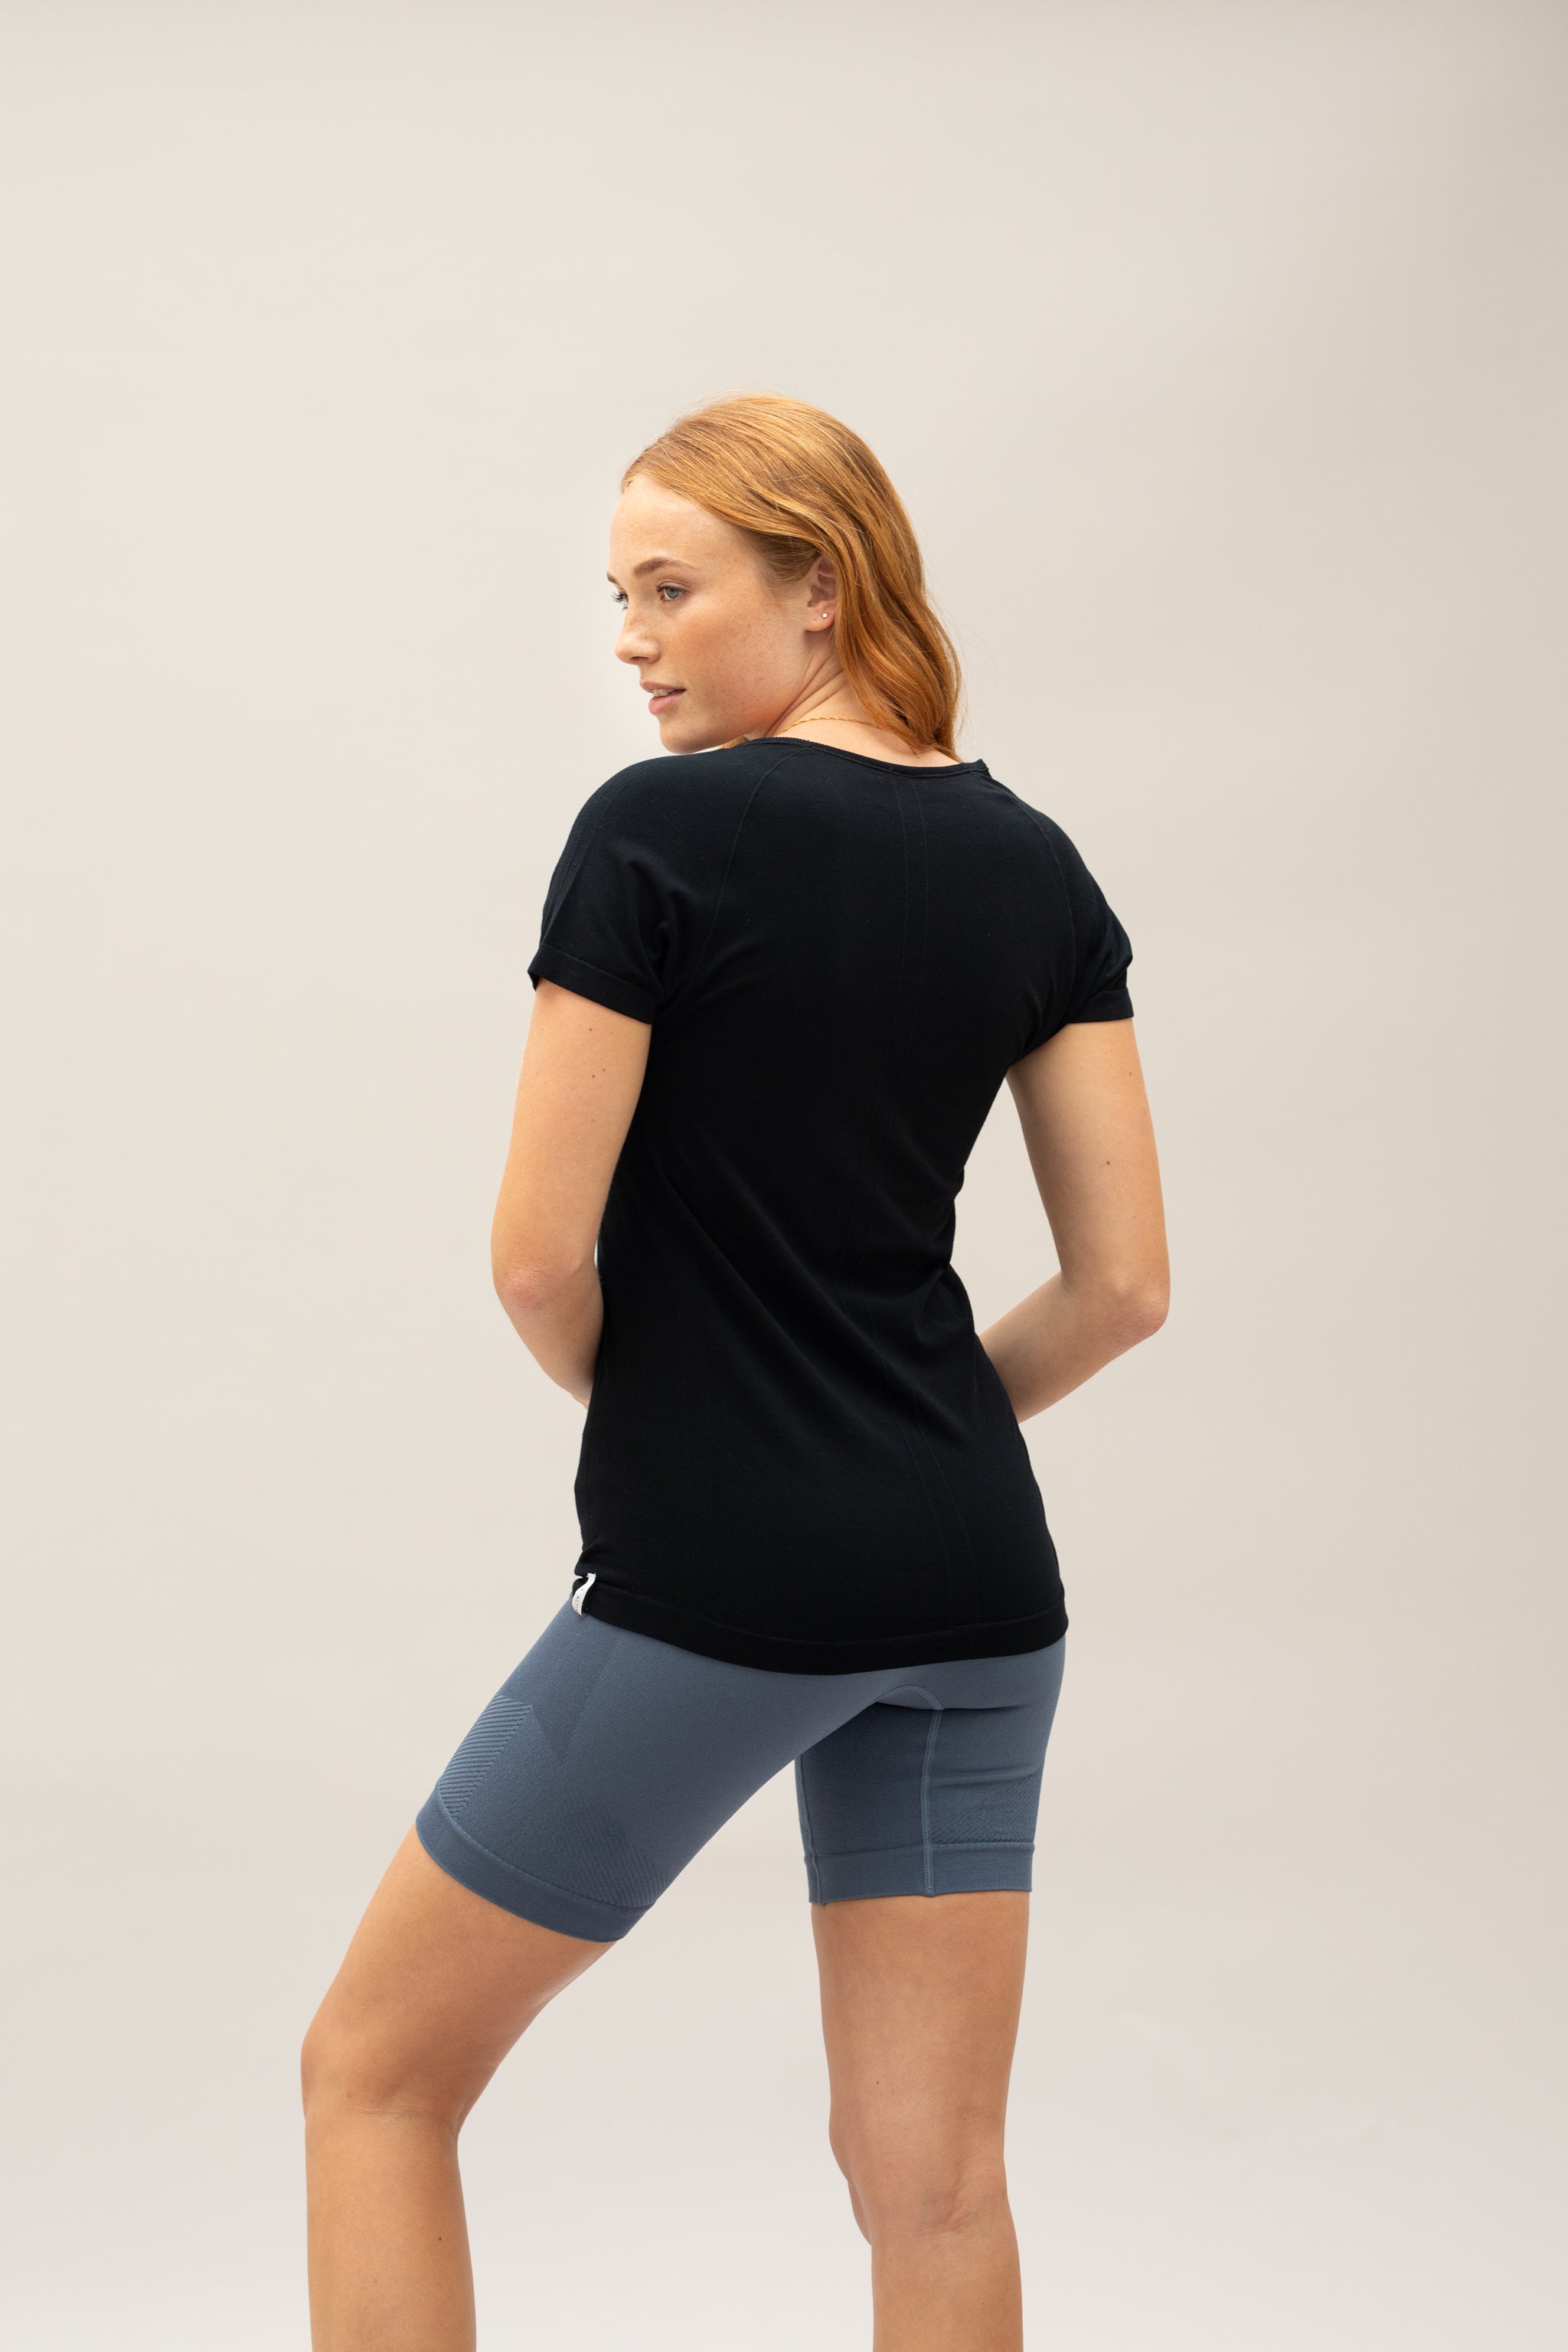 Model wearing black basic T-shirt with beige yoga leggings for sustainable activewear brand, Jilla Active  Edit alt text